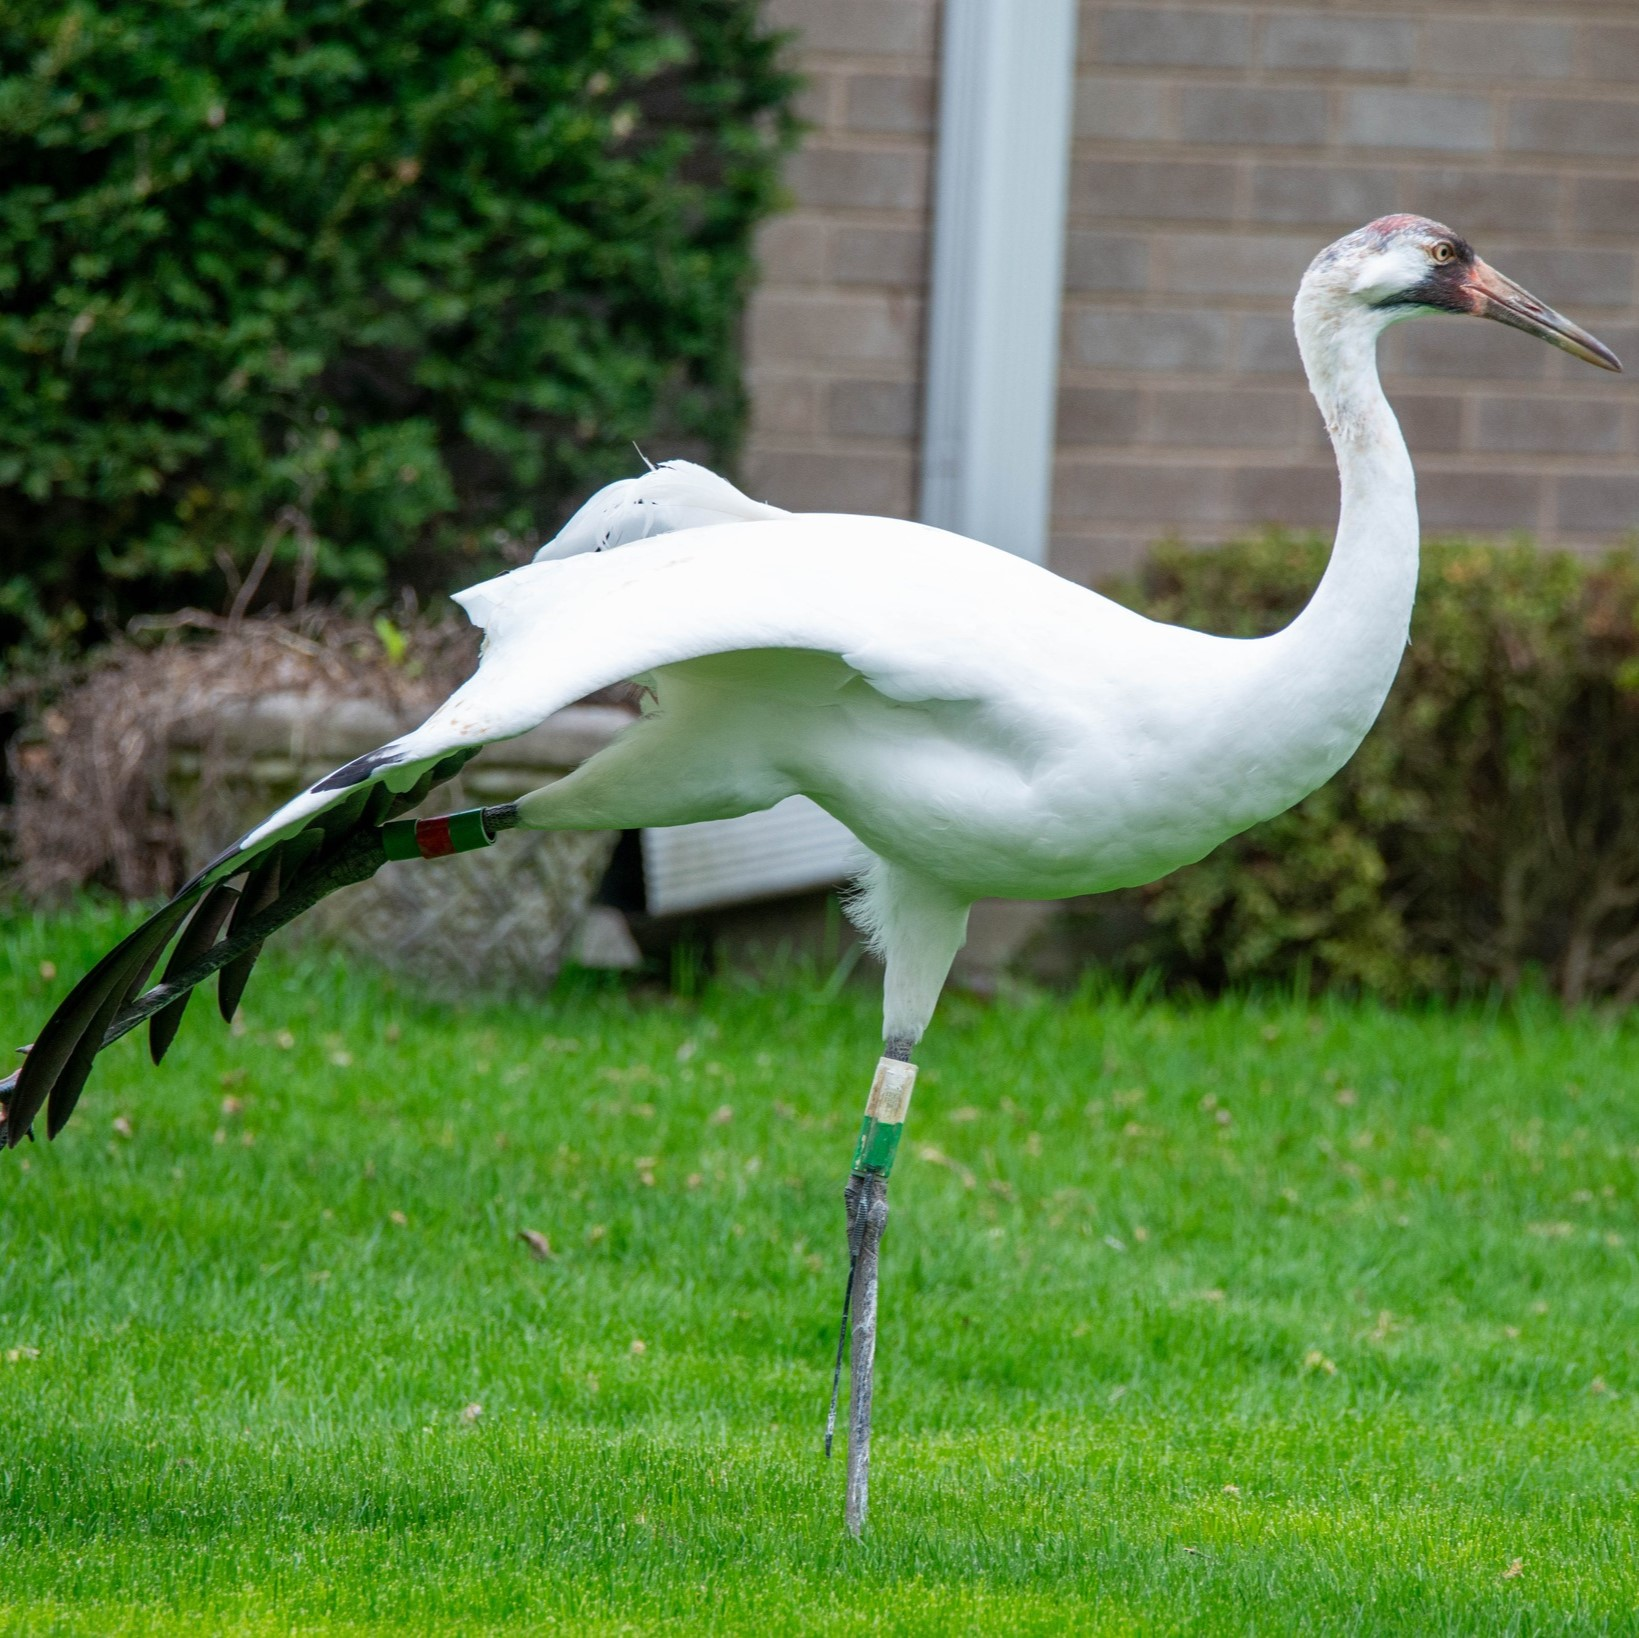 Wild journey brings endangered whooping crane back to Wisconsin organization